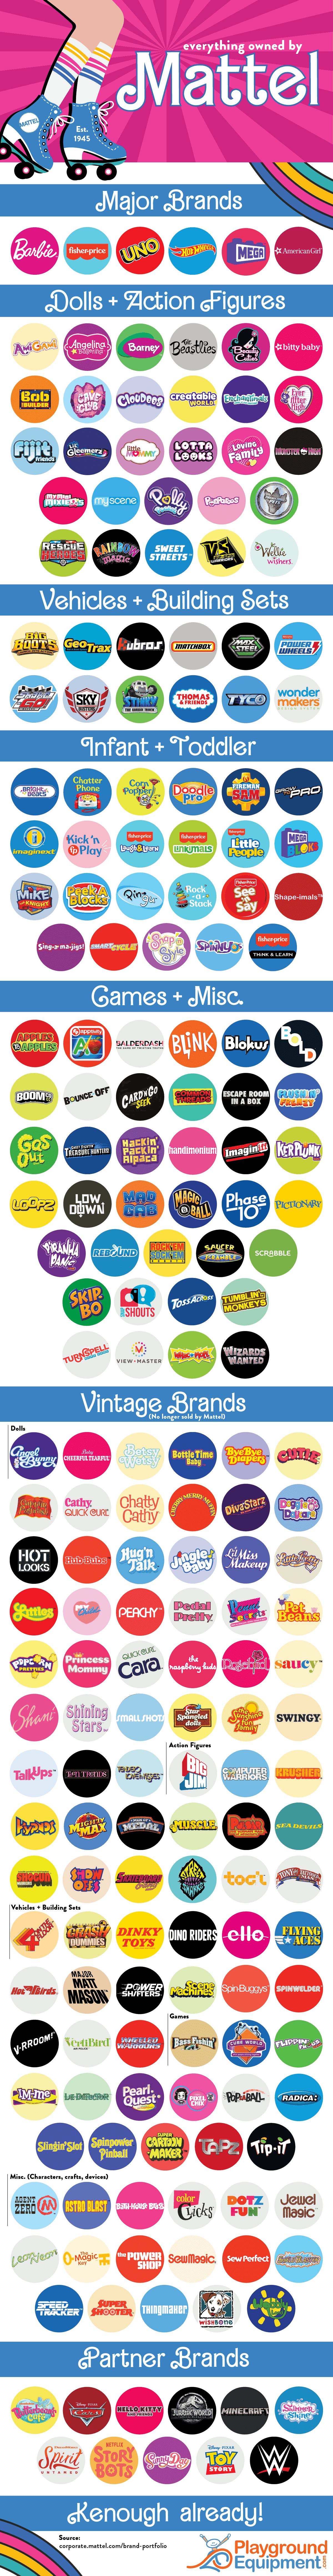 Discussing The Brands That Mattel Owns #Infographic